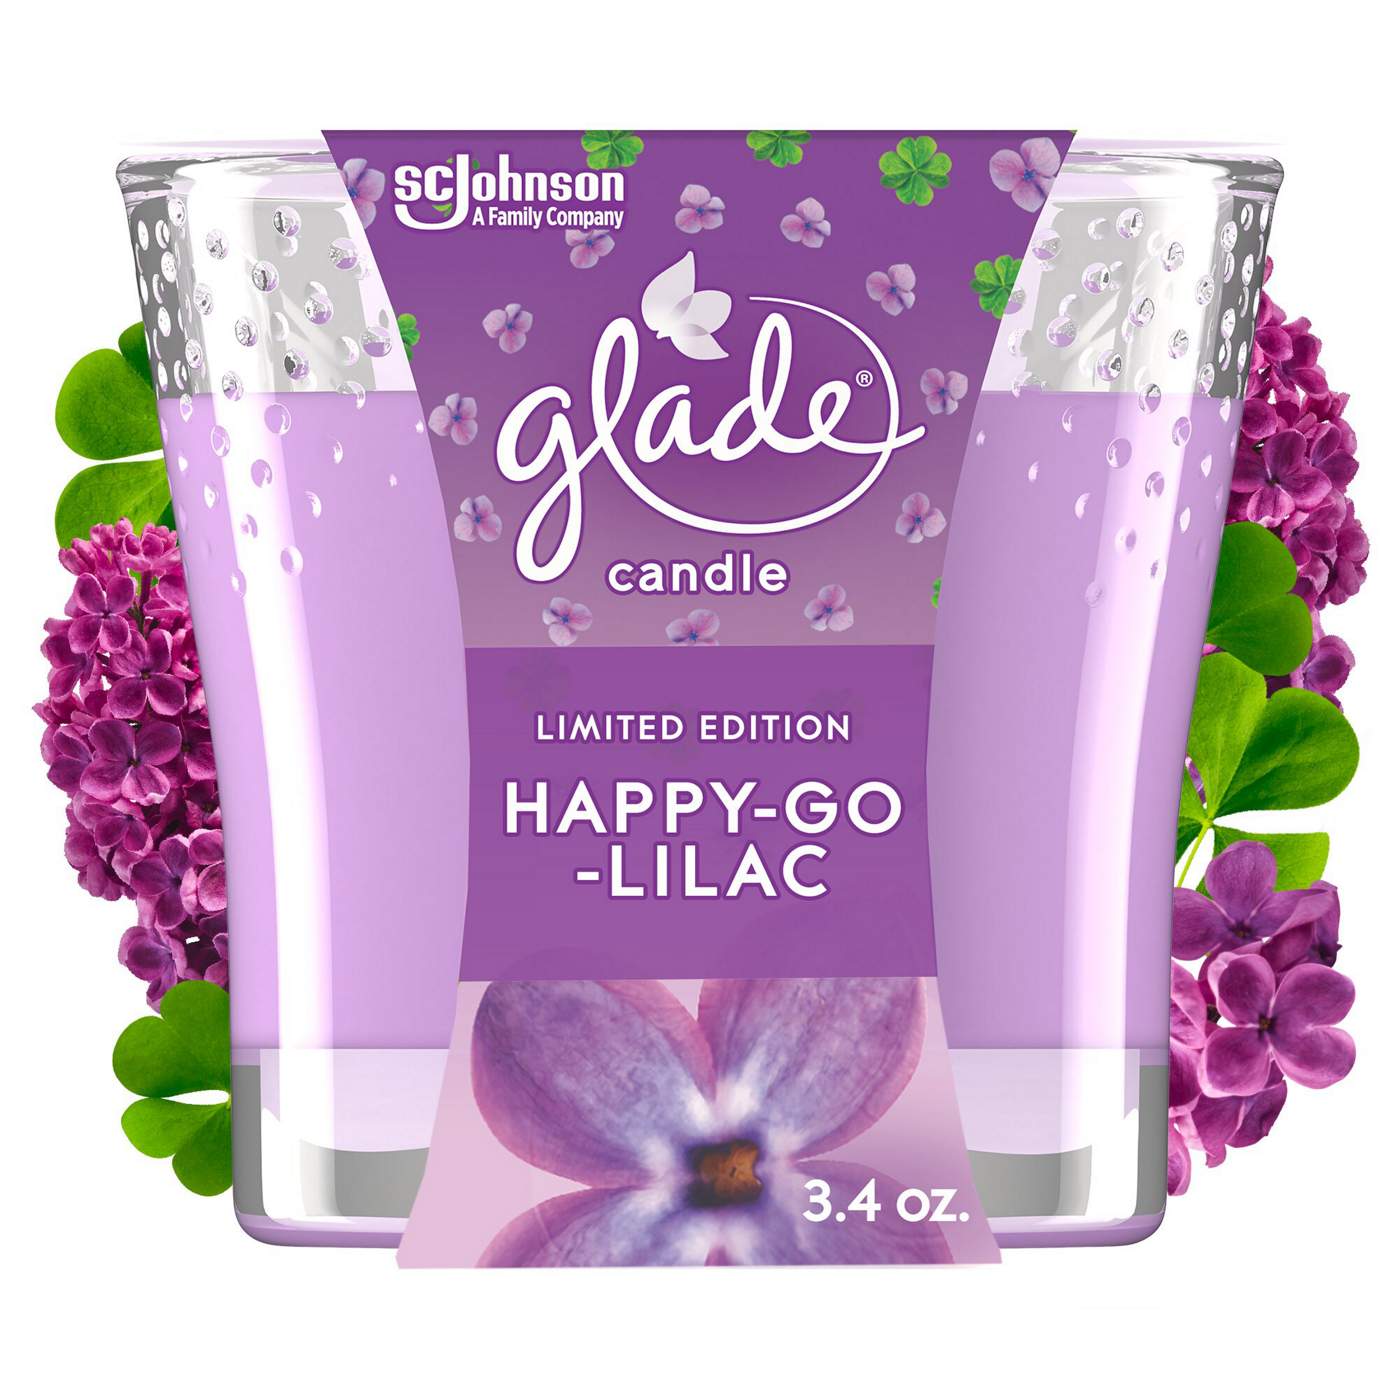 Glade Happy Go Lilac Candle; image 1 of 2